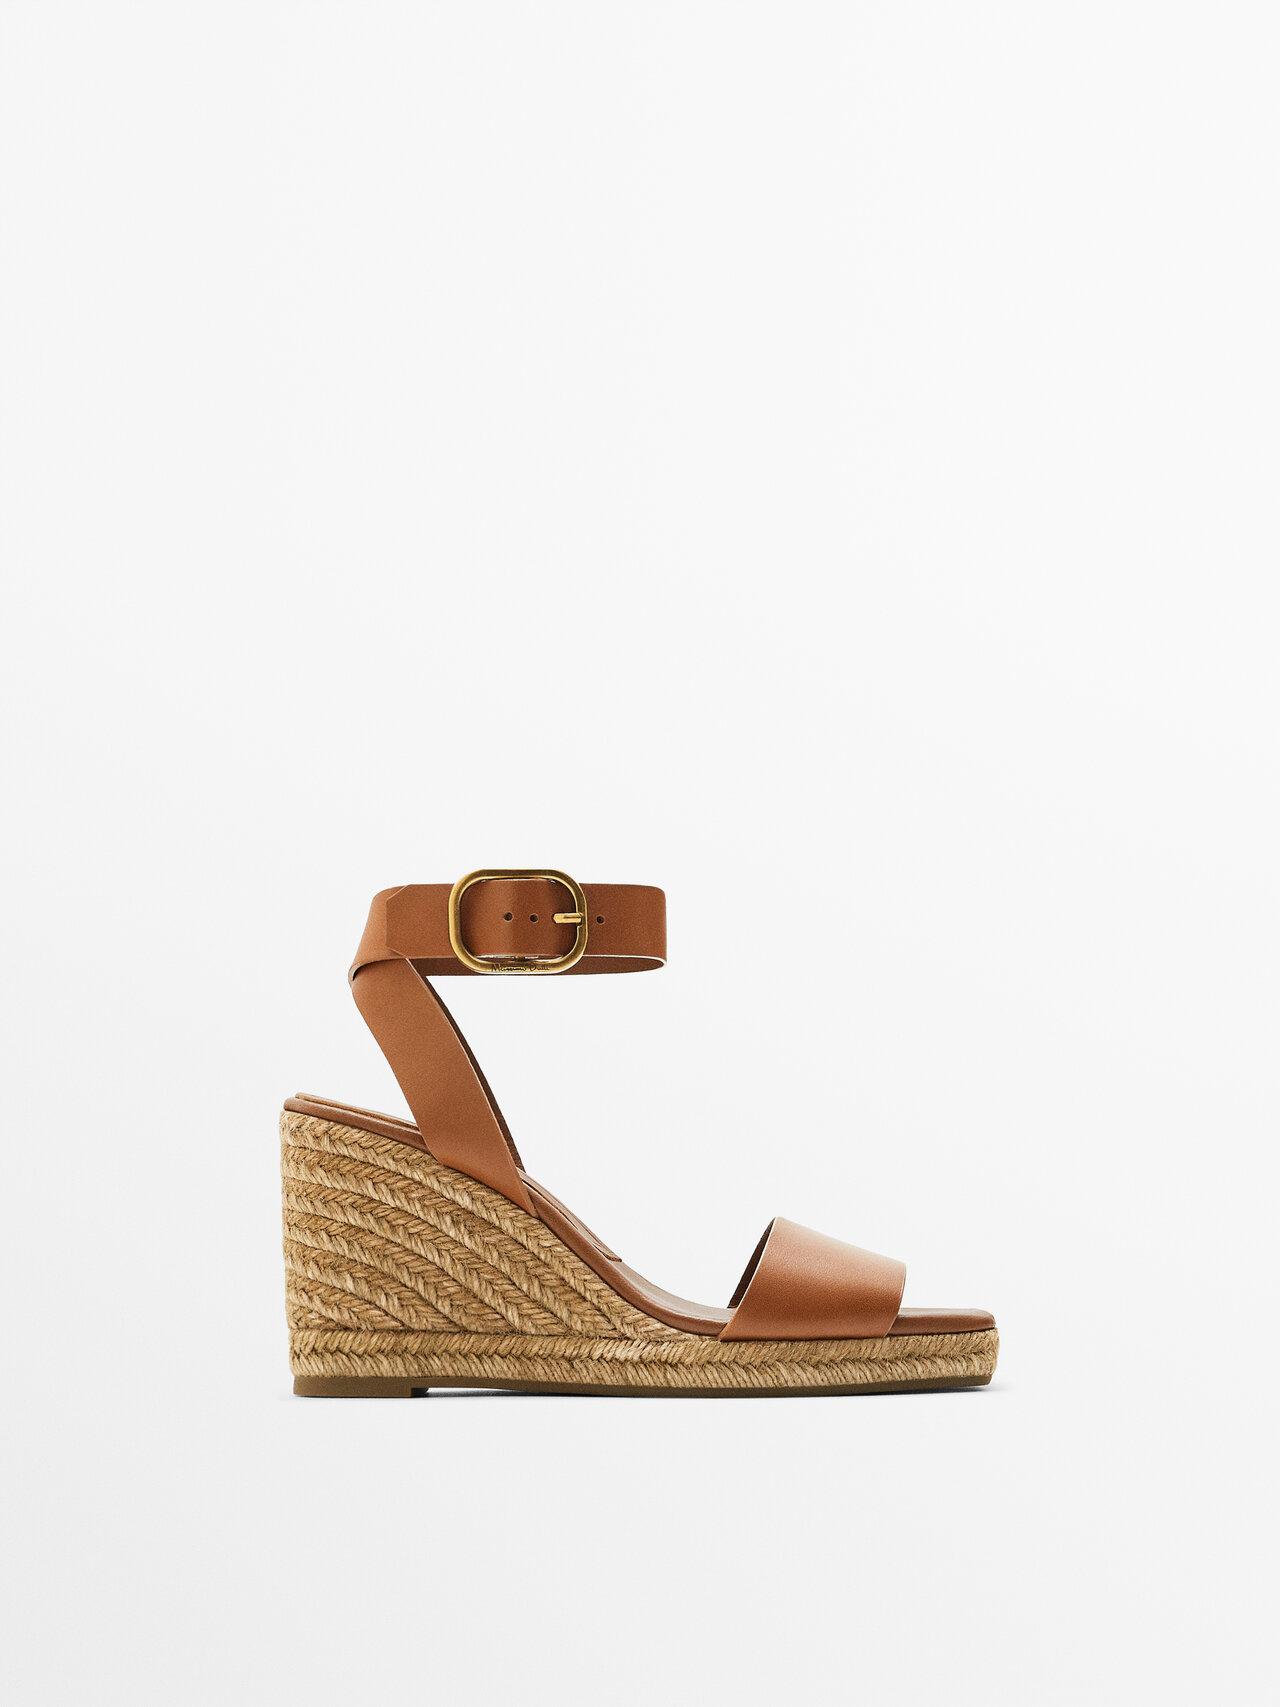 MASSIMO DUTTI Jute Wedges With Buckled Ankle Strap in White | Lyst